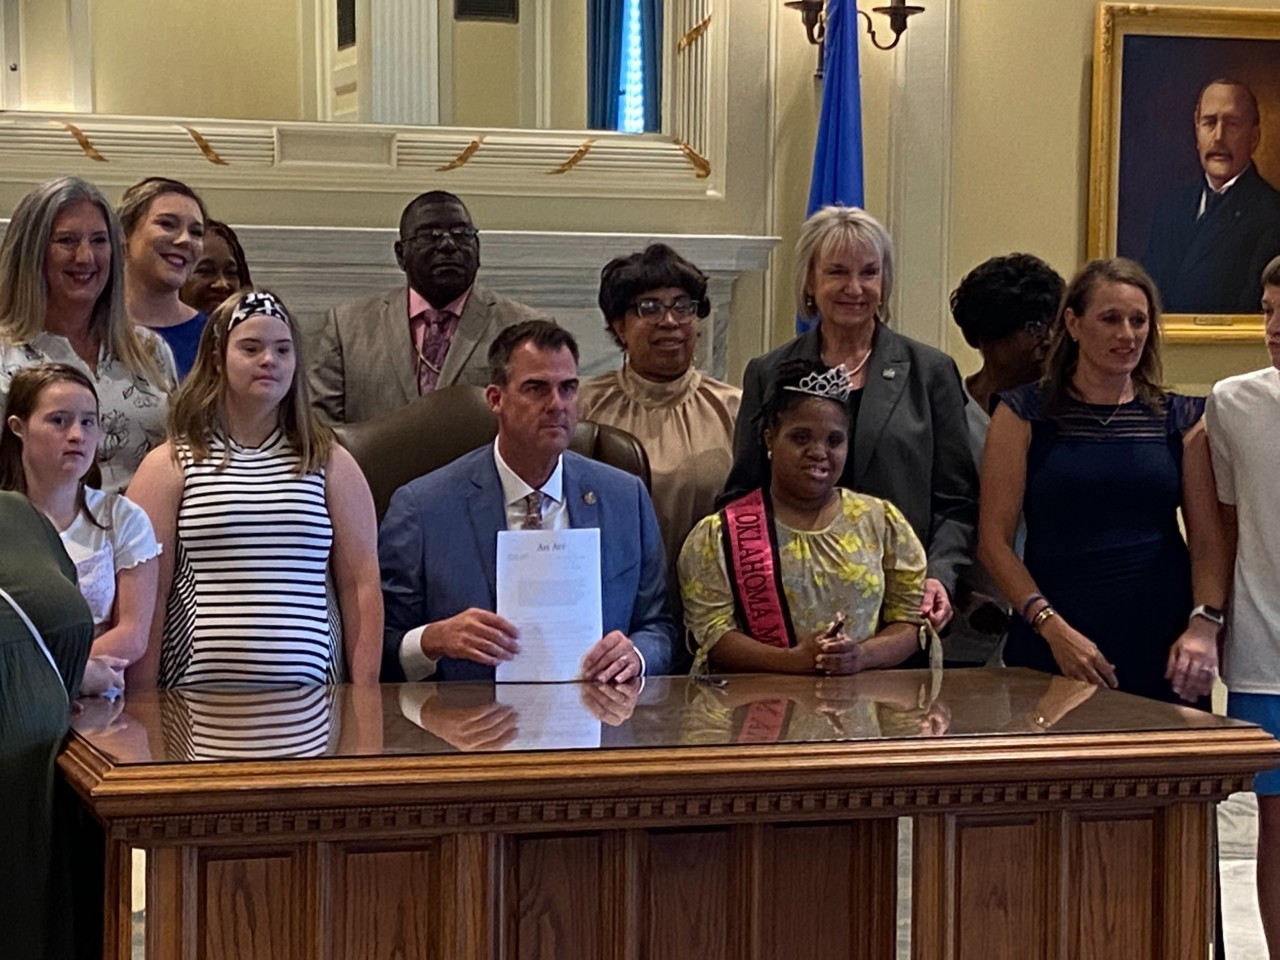 Bill signing of "Courtney's Law" with Governor Stitt